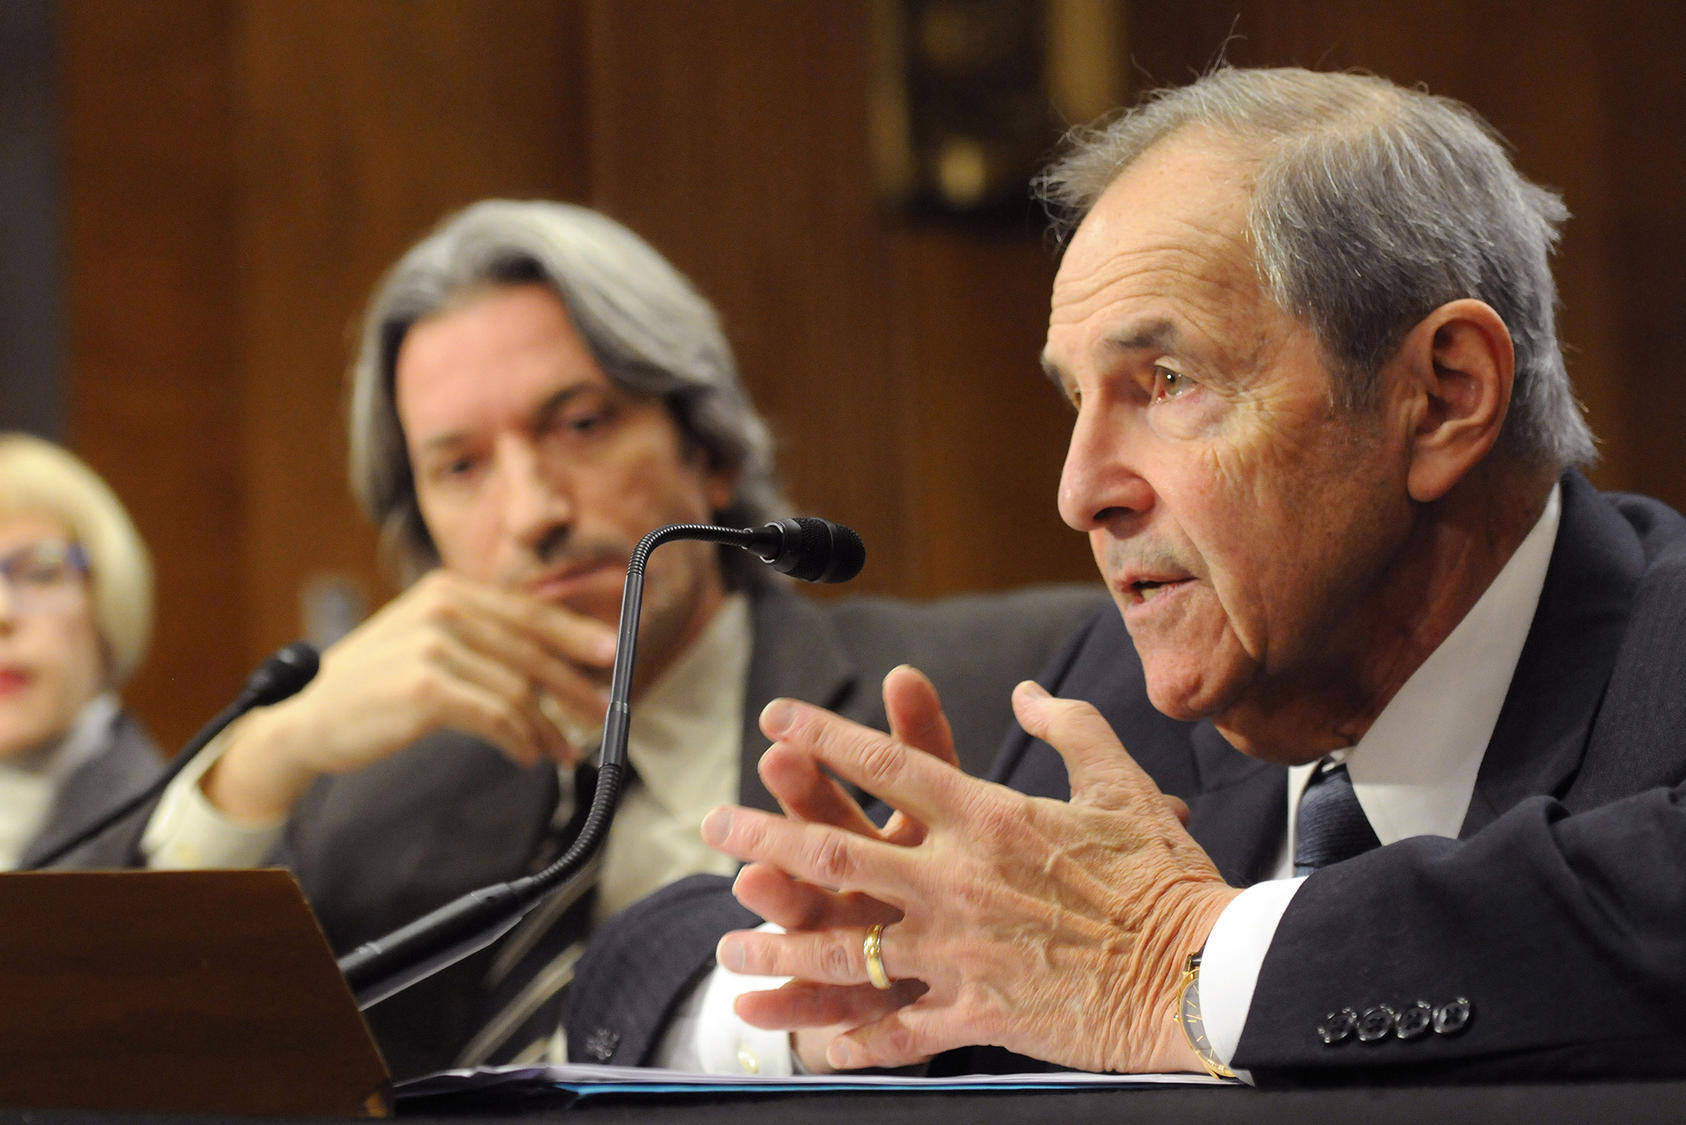 Ambassador Lyman testifies before the Senate Foreign Relations Committee on the political context of the conflict in South Sudan, January 9, 2014.